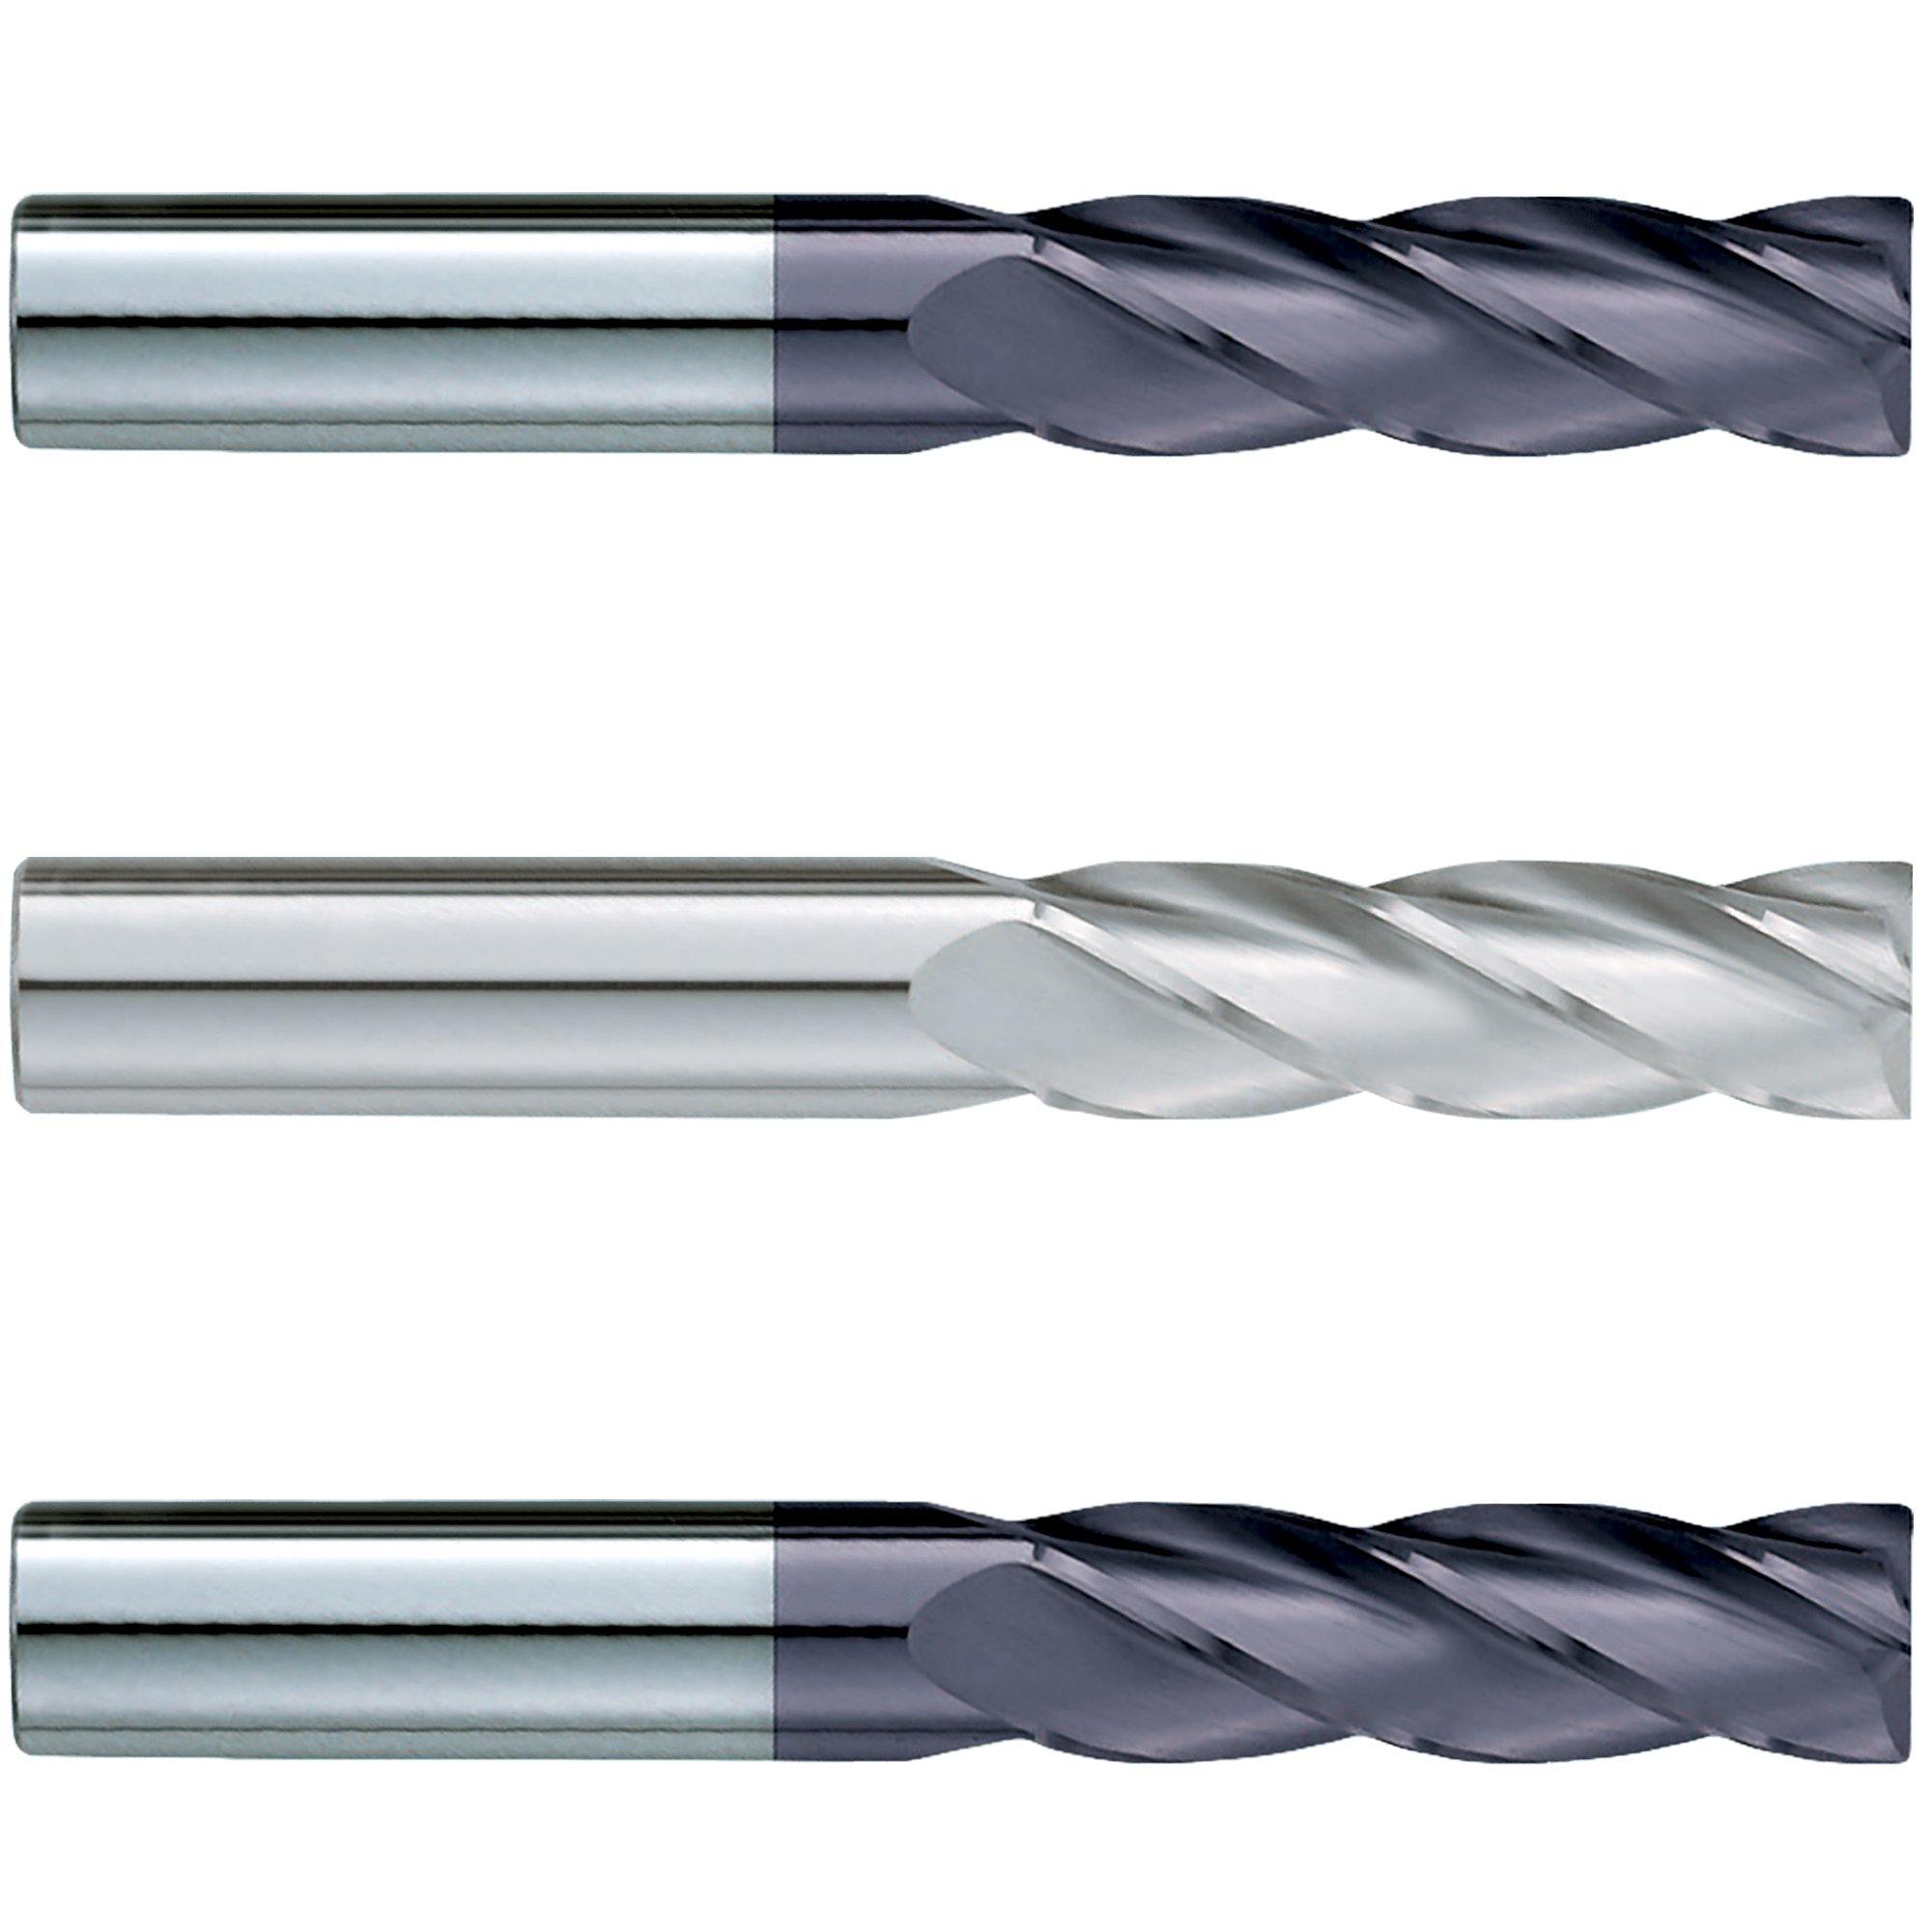 (3 Pack) 3/8" x 4" x 7" Super Long Square Carbide End Mill - The End Mill Store 